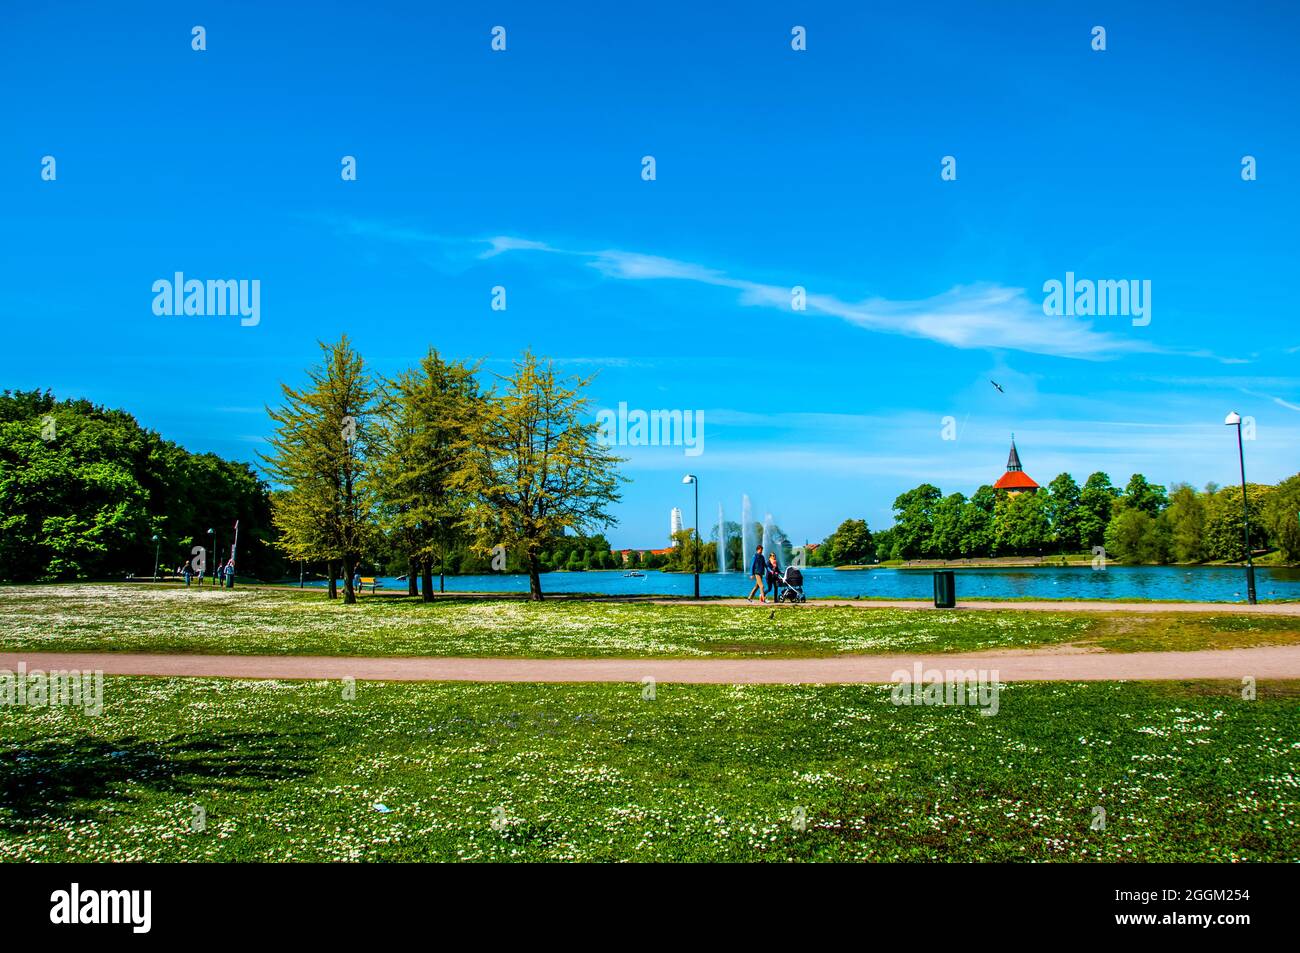 Willowpond Park or Pildammsparken with fountains in the Malmo city Stock Photo